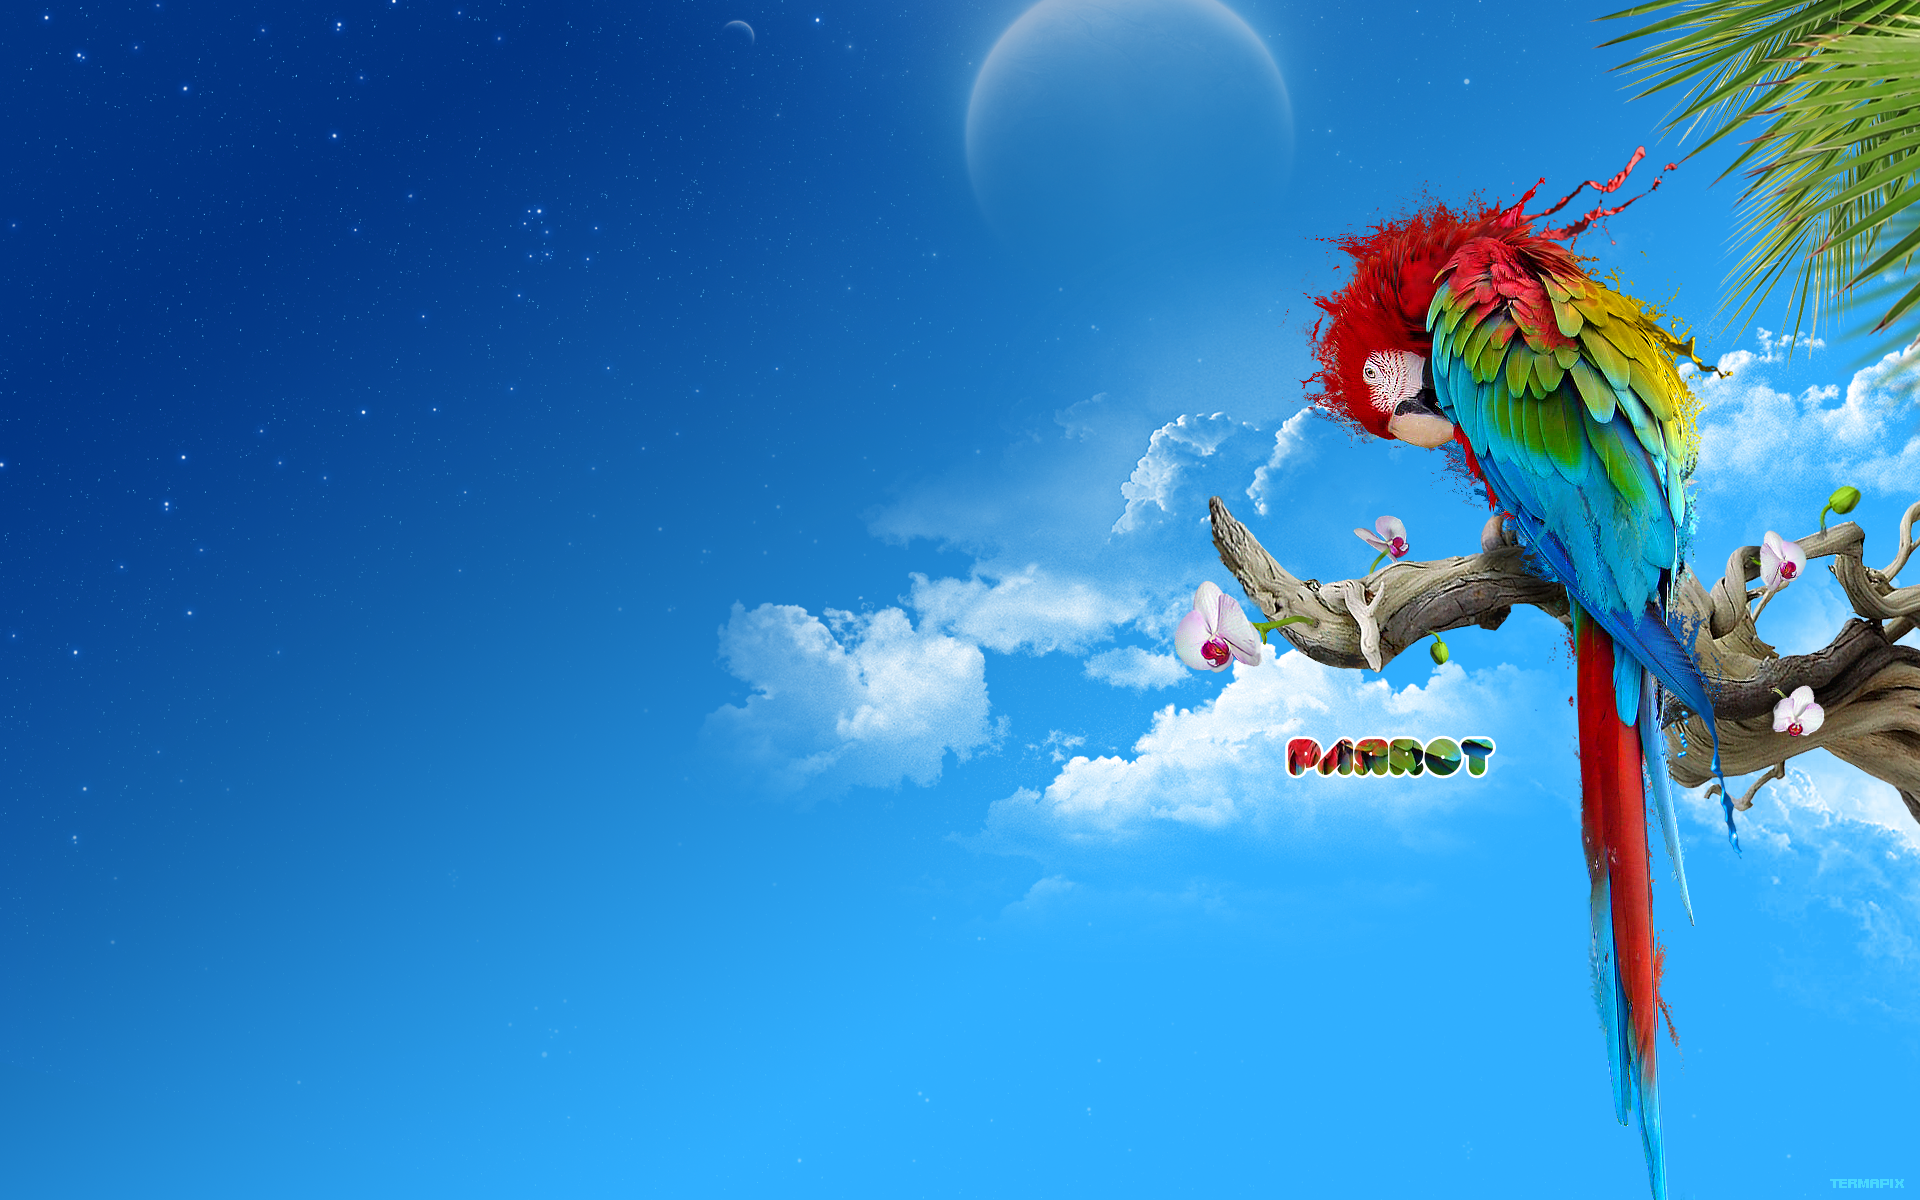 Download Full Animals Birds Clouds Palm Leafs Parrots Wallpaper ...